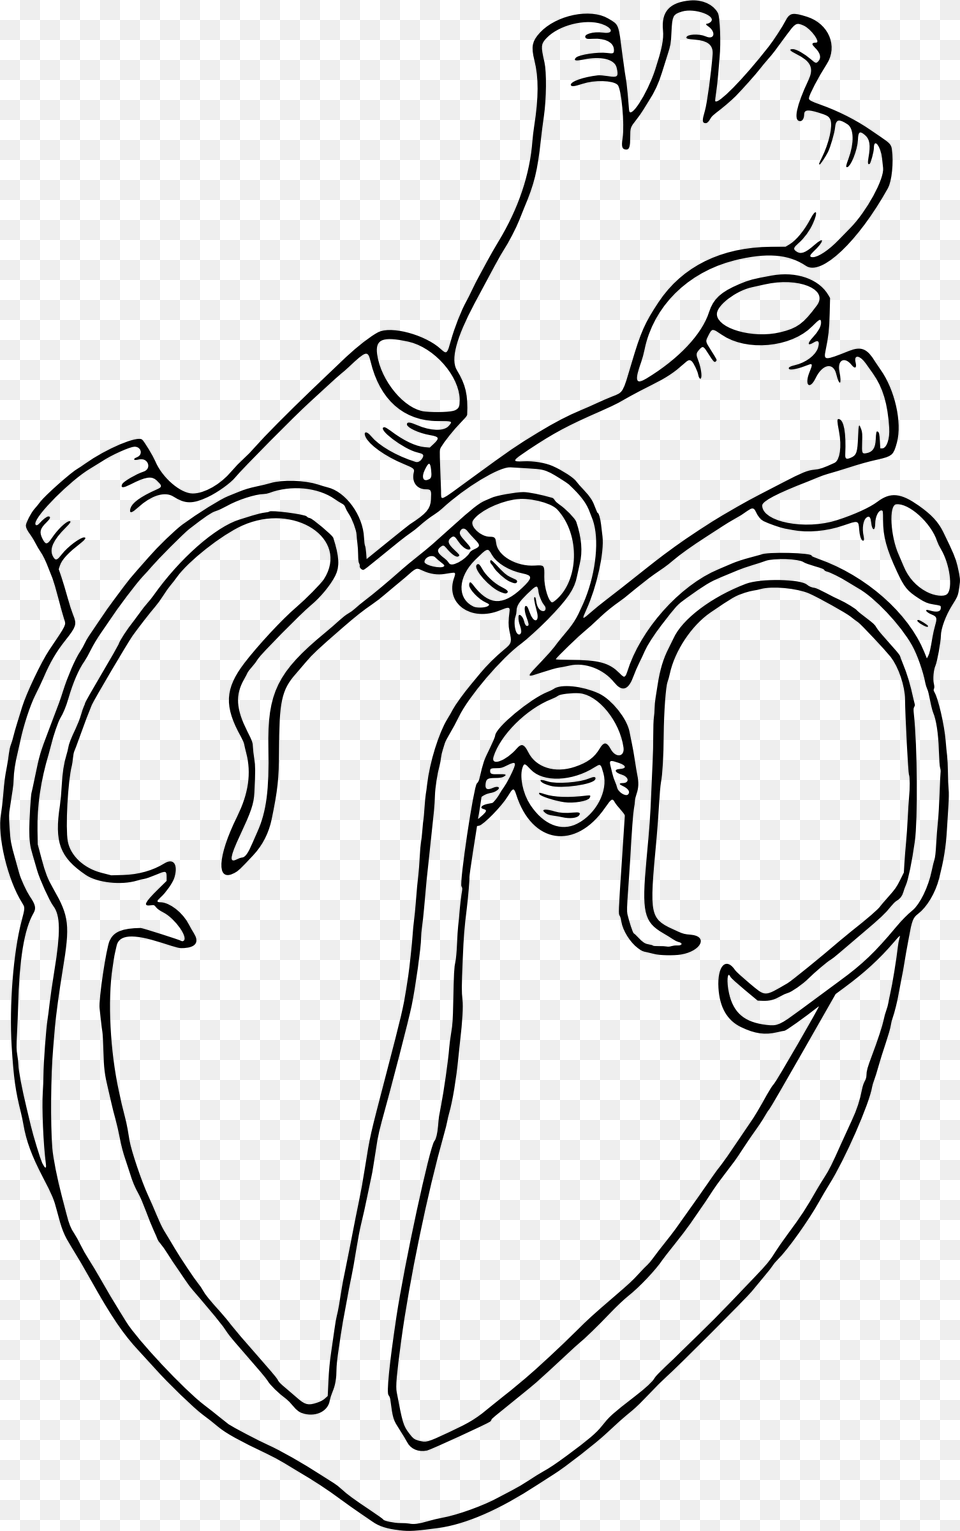 Heart Diagram Library Heart Diagram Clipart, Gray Png Image